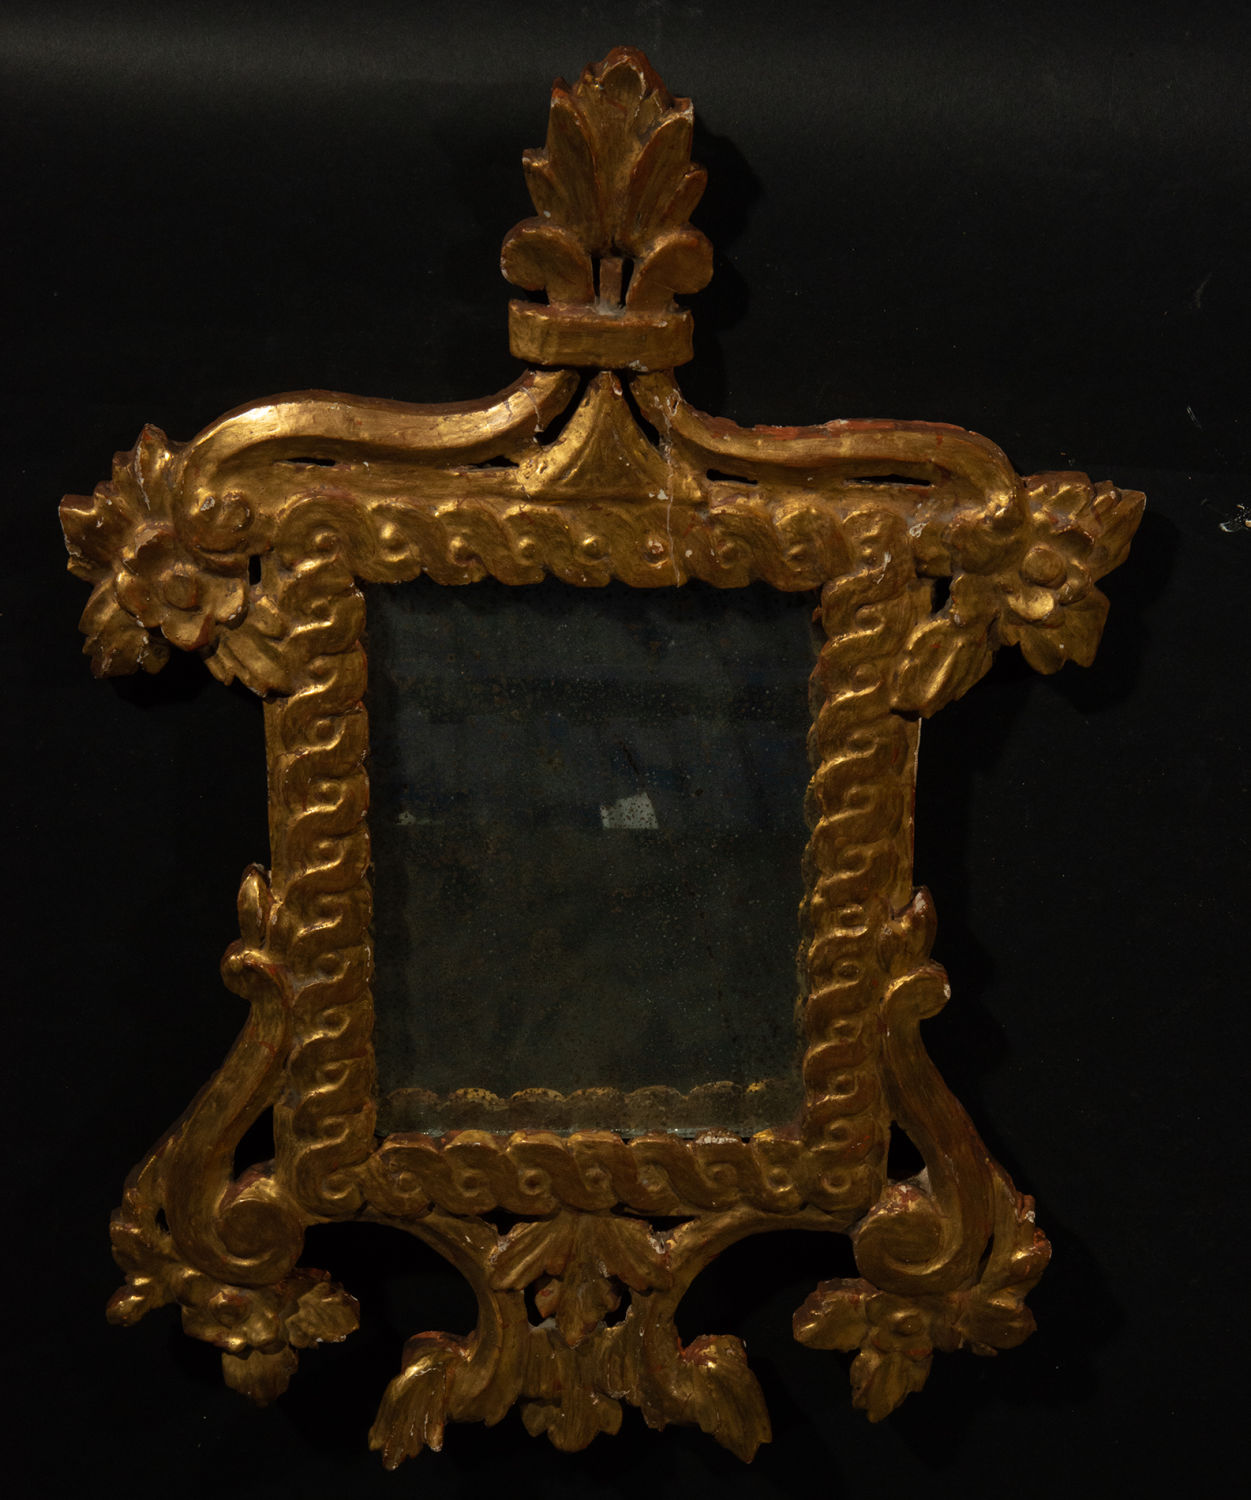 Cornucopia frame in wood gilded with gold leaf, 19th century - Image 2 of 4